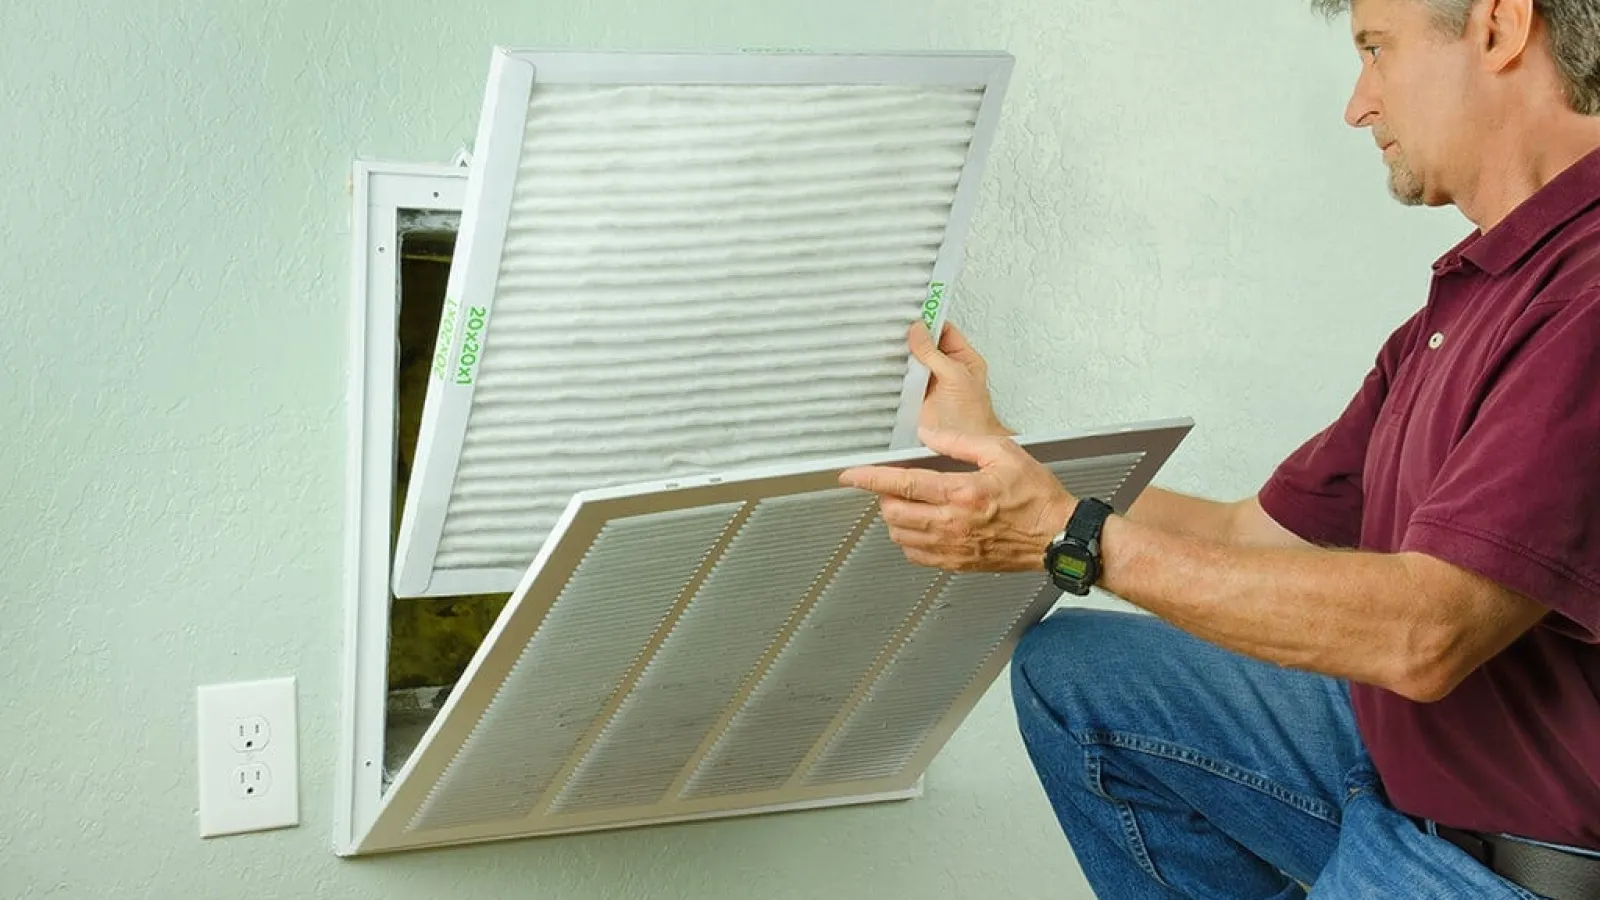 3 DIY Ways to Maintain Your Own Air Conditioner